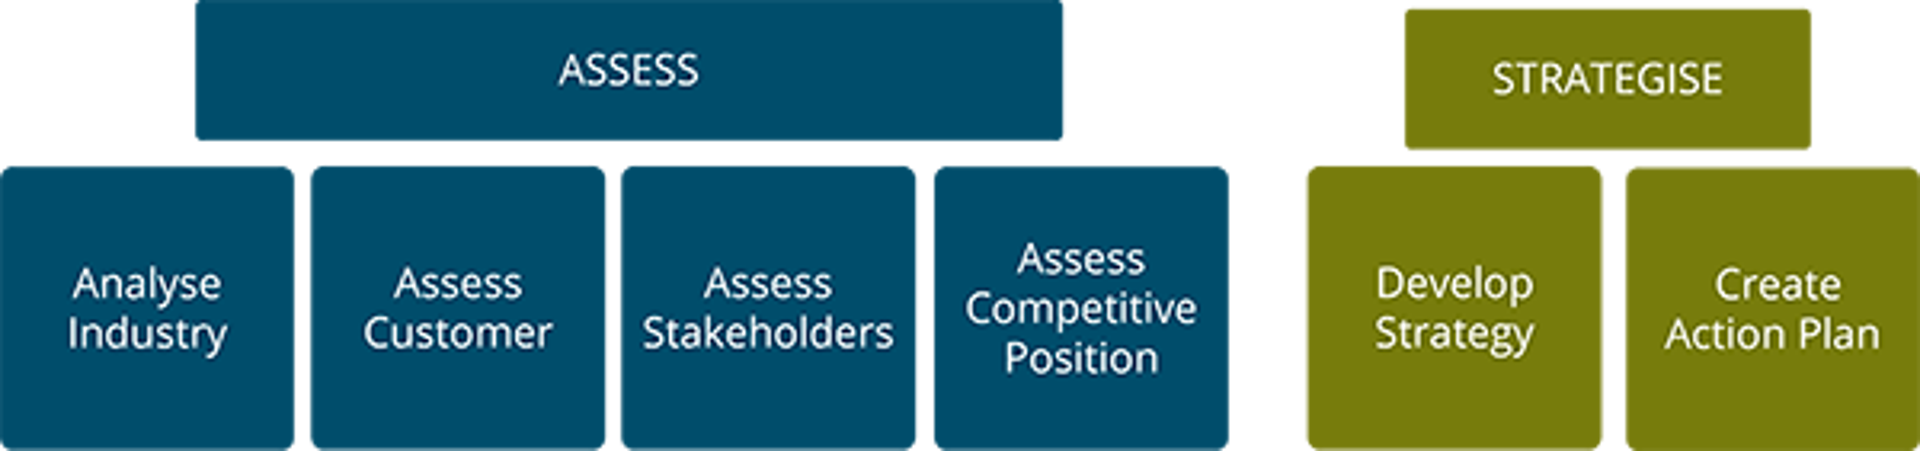 prosperous account strategy training program framework: assess modules include analyse industry, assess customer, assess stakeholders, assess competitive position. strategise modules include develop strategy, create action plan.